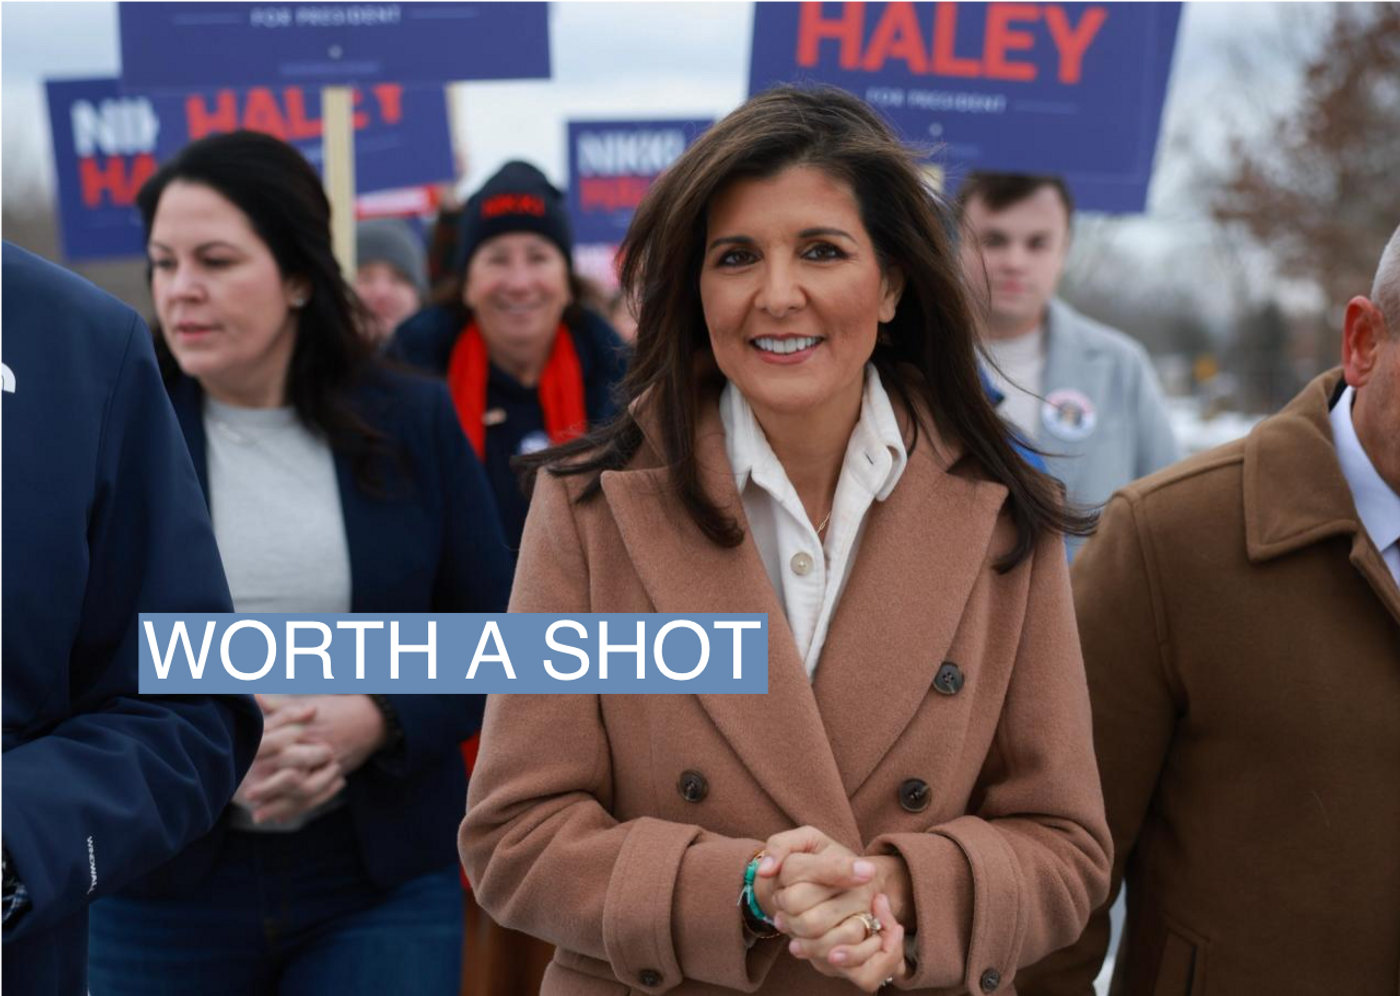 Republican presidential candidate Nikki Haley visits a polling location at Winnacunnet High School to greet voters on Jan. 23, 2024, in Hampton, N.H.